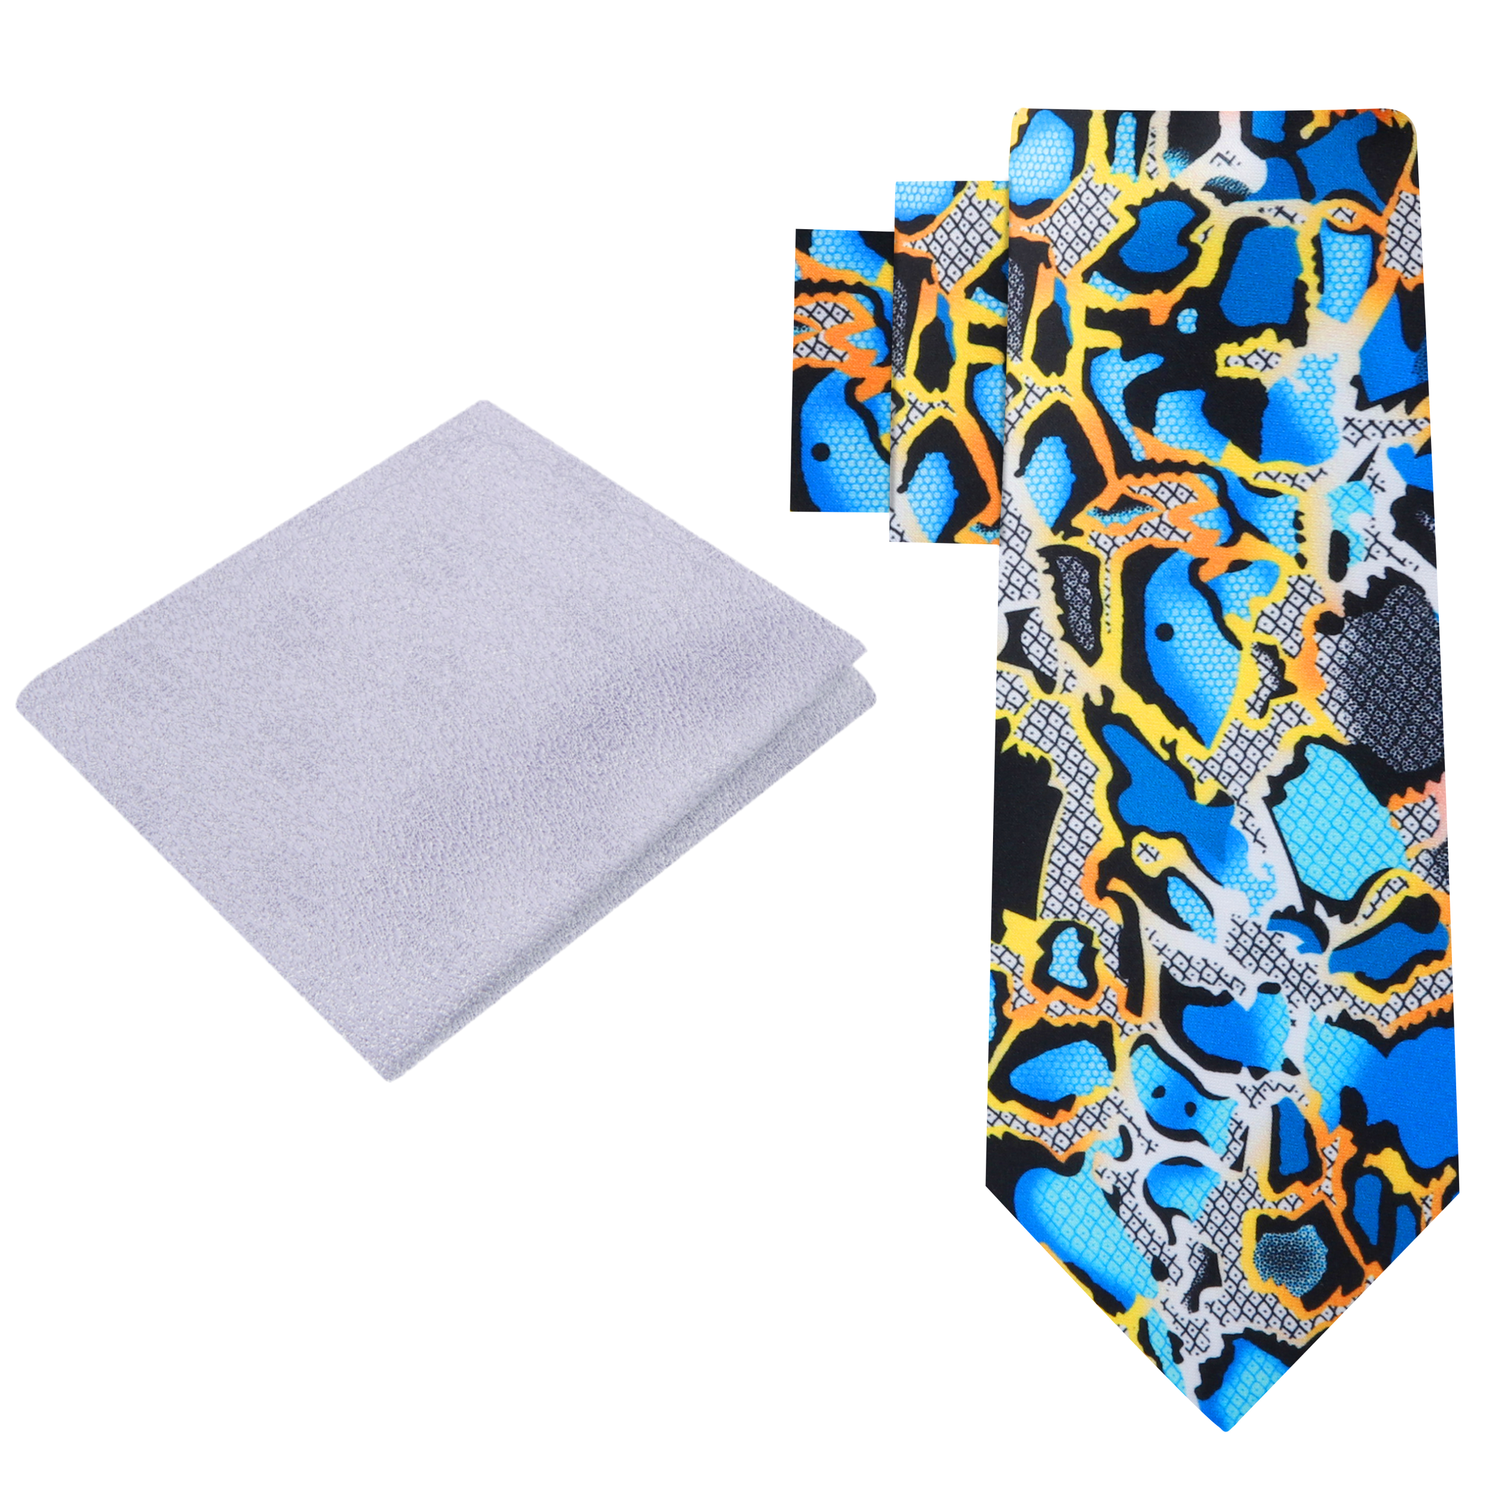 Alt View: Blue Gold Snakeskin Tie and Silver Shimmer Square